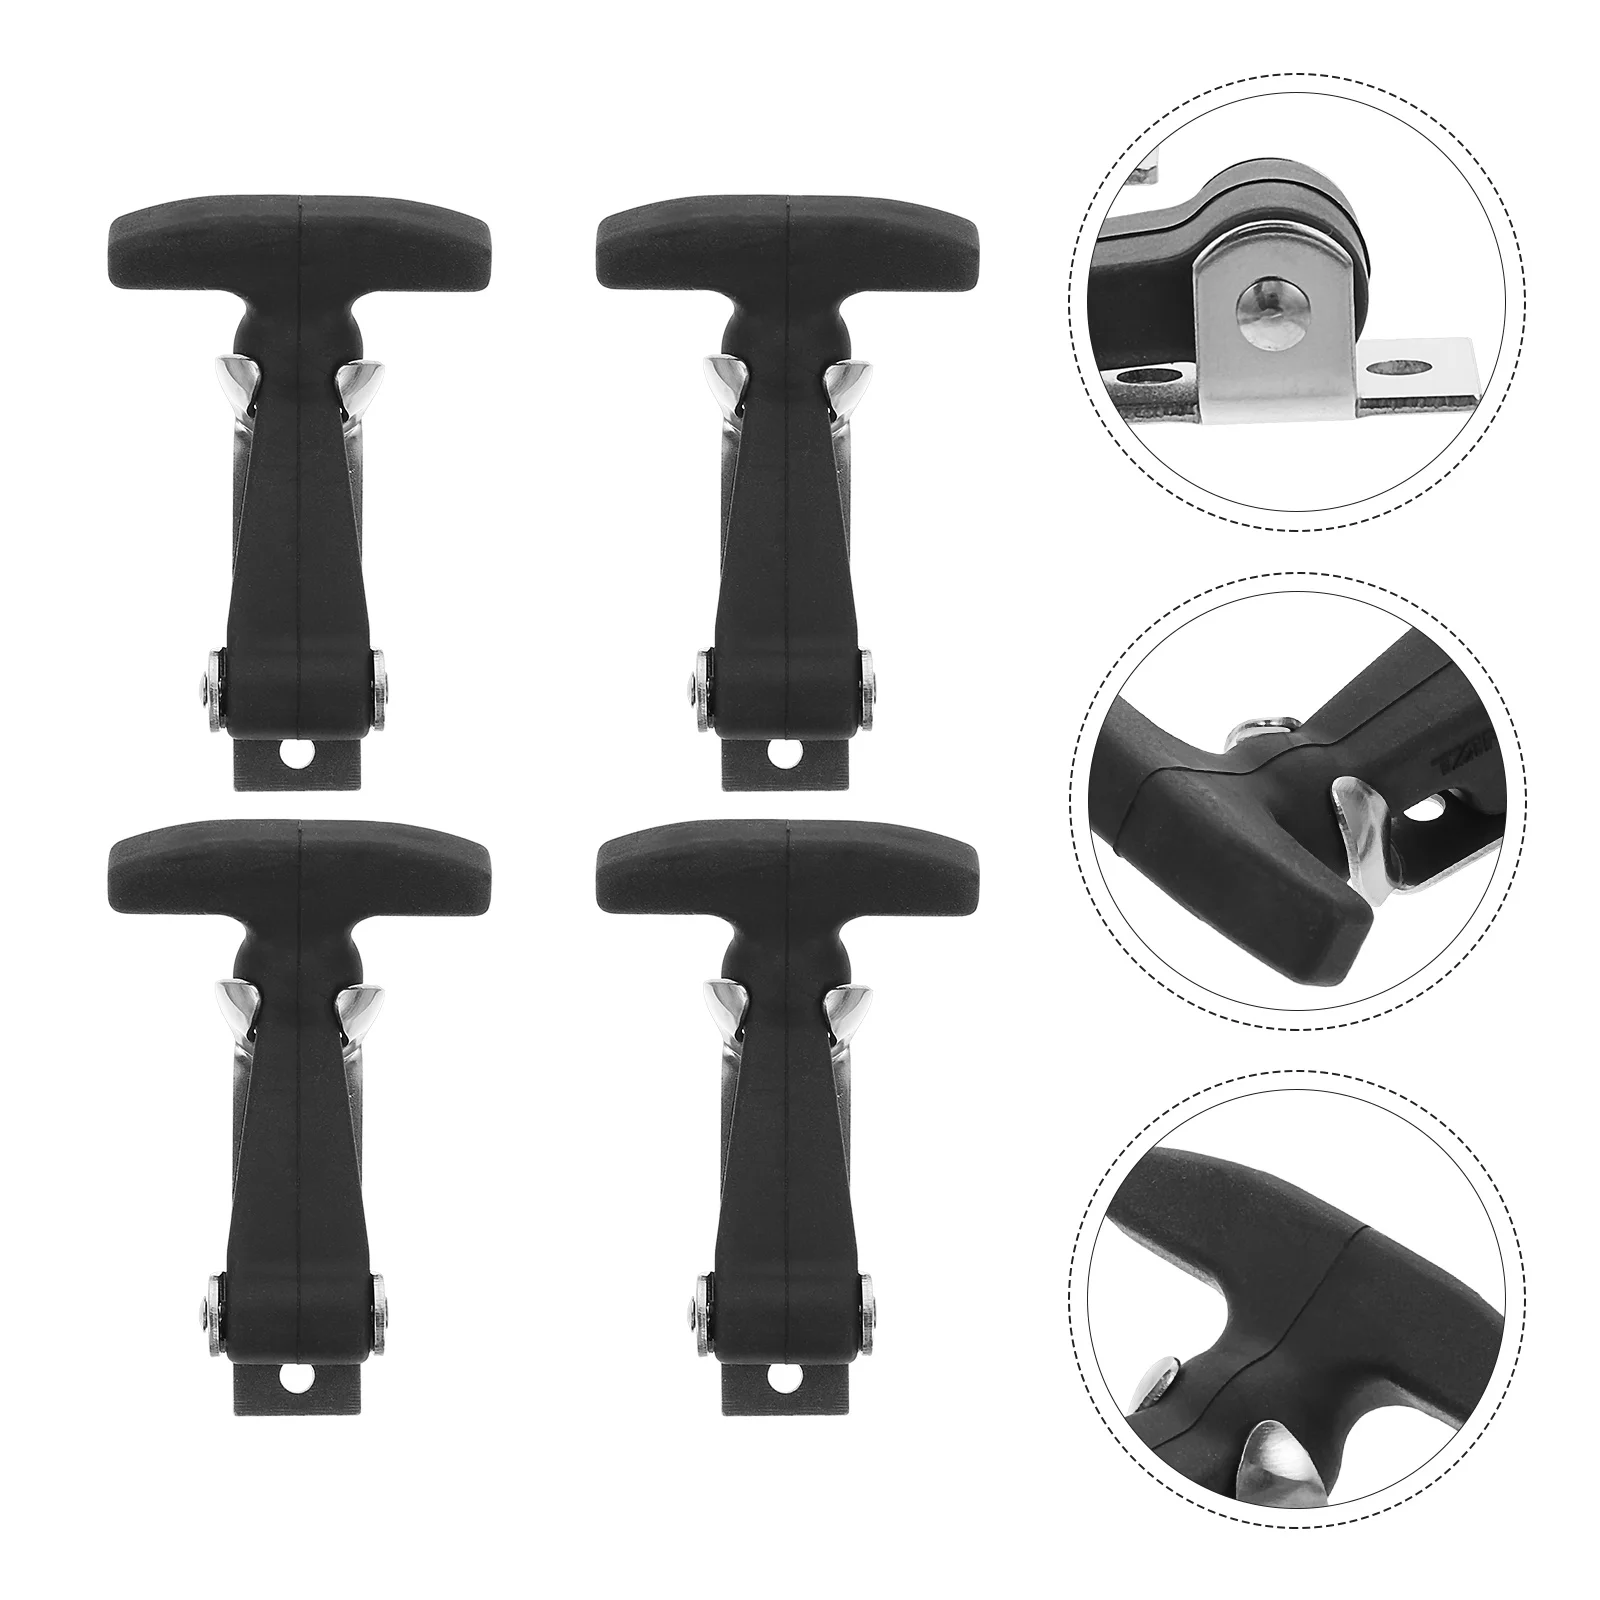 

T Handle Latch Hood Stainless Steel Latches Car Flexible Engine Hasp Locks Boat Cam Catch Locking Bar Flush Mount Rubber Draw